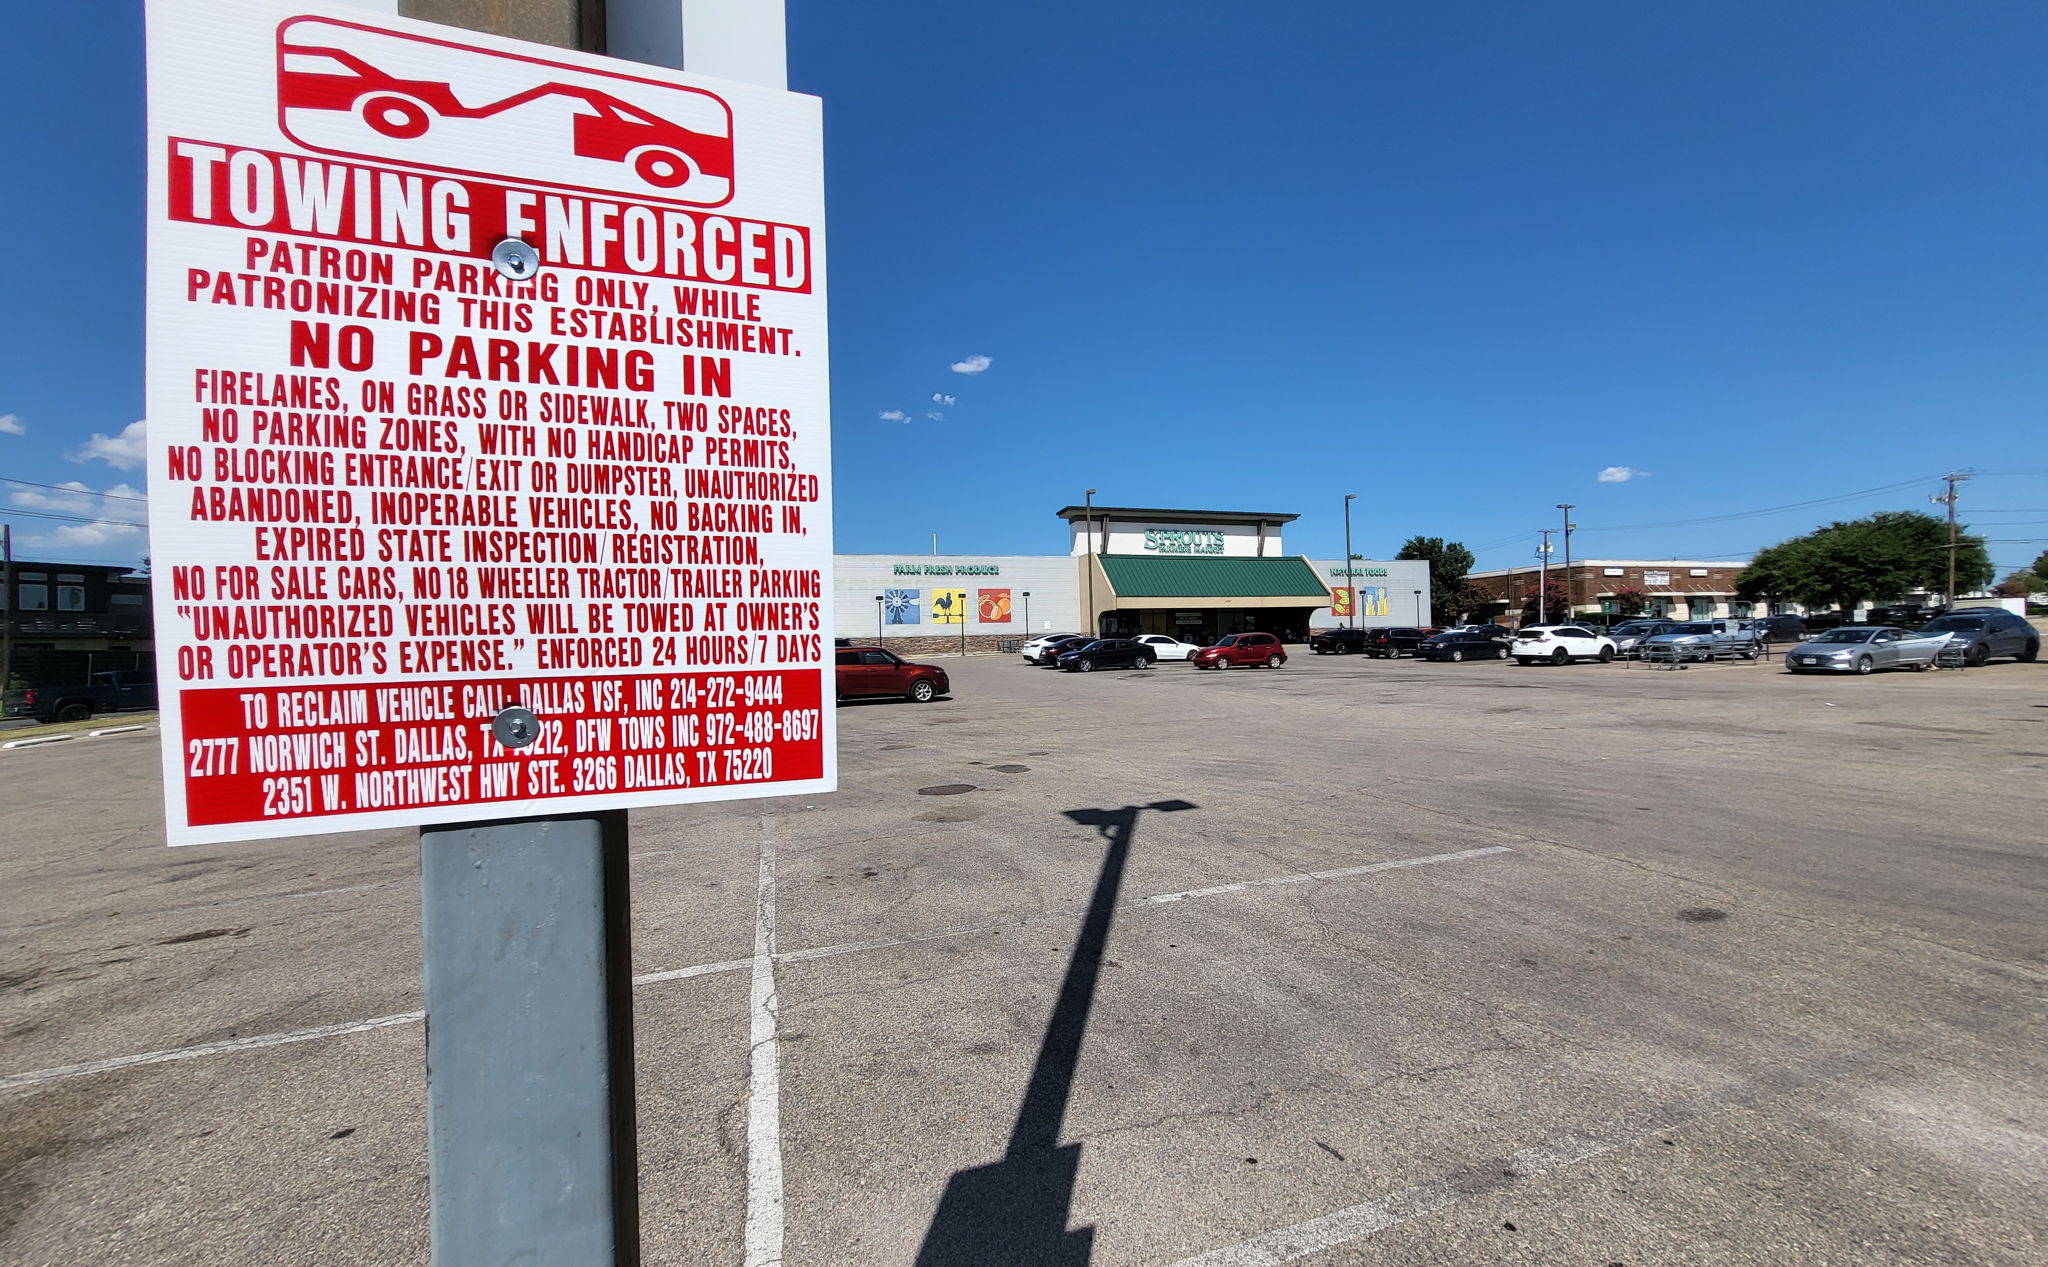 Several big box stores like Sprouts, Fiesta, Sams Club, and CVS Pharmacy have exclusive rights to hundreds of empty parking spaces.